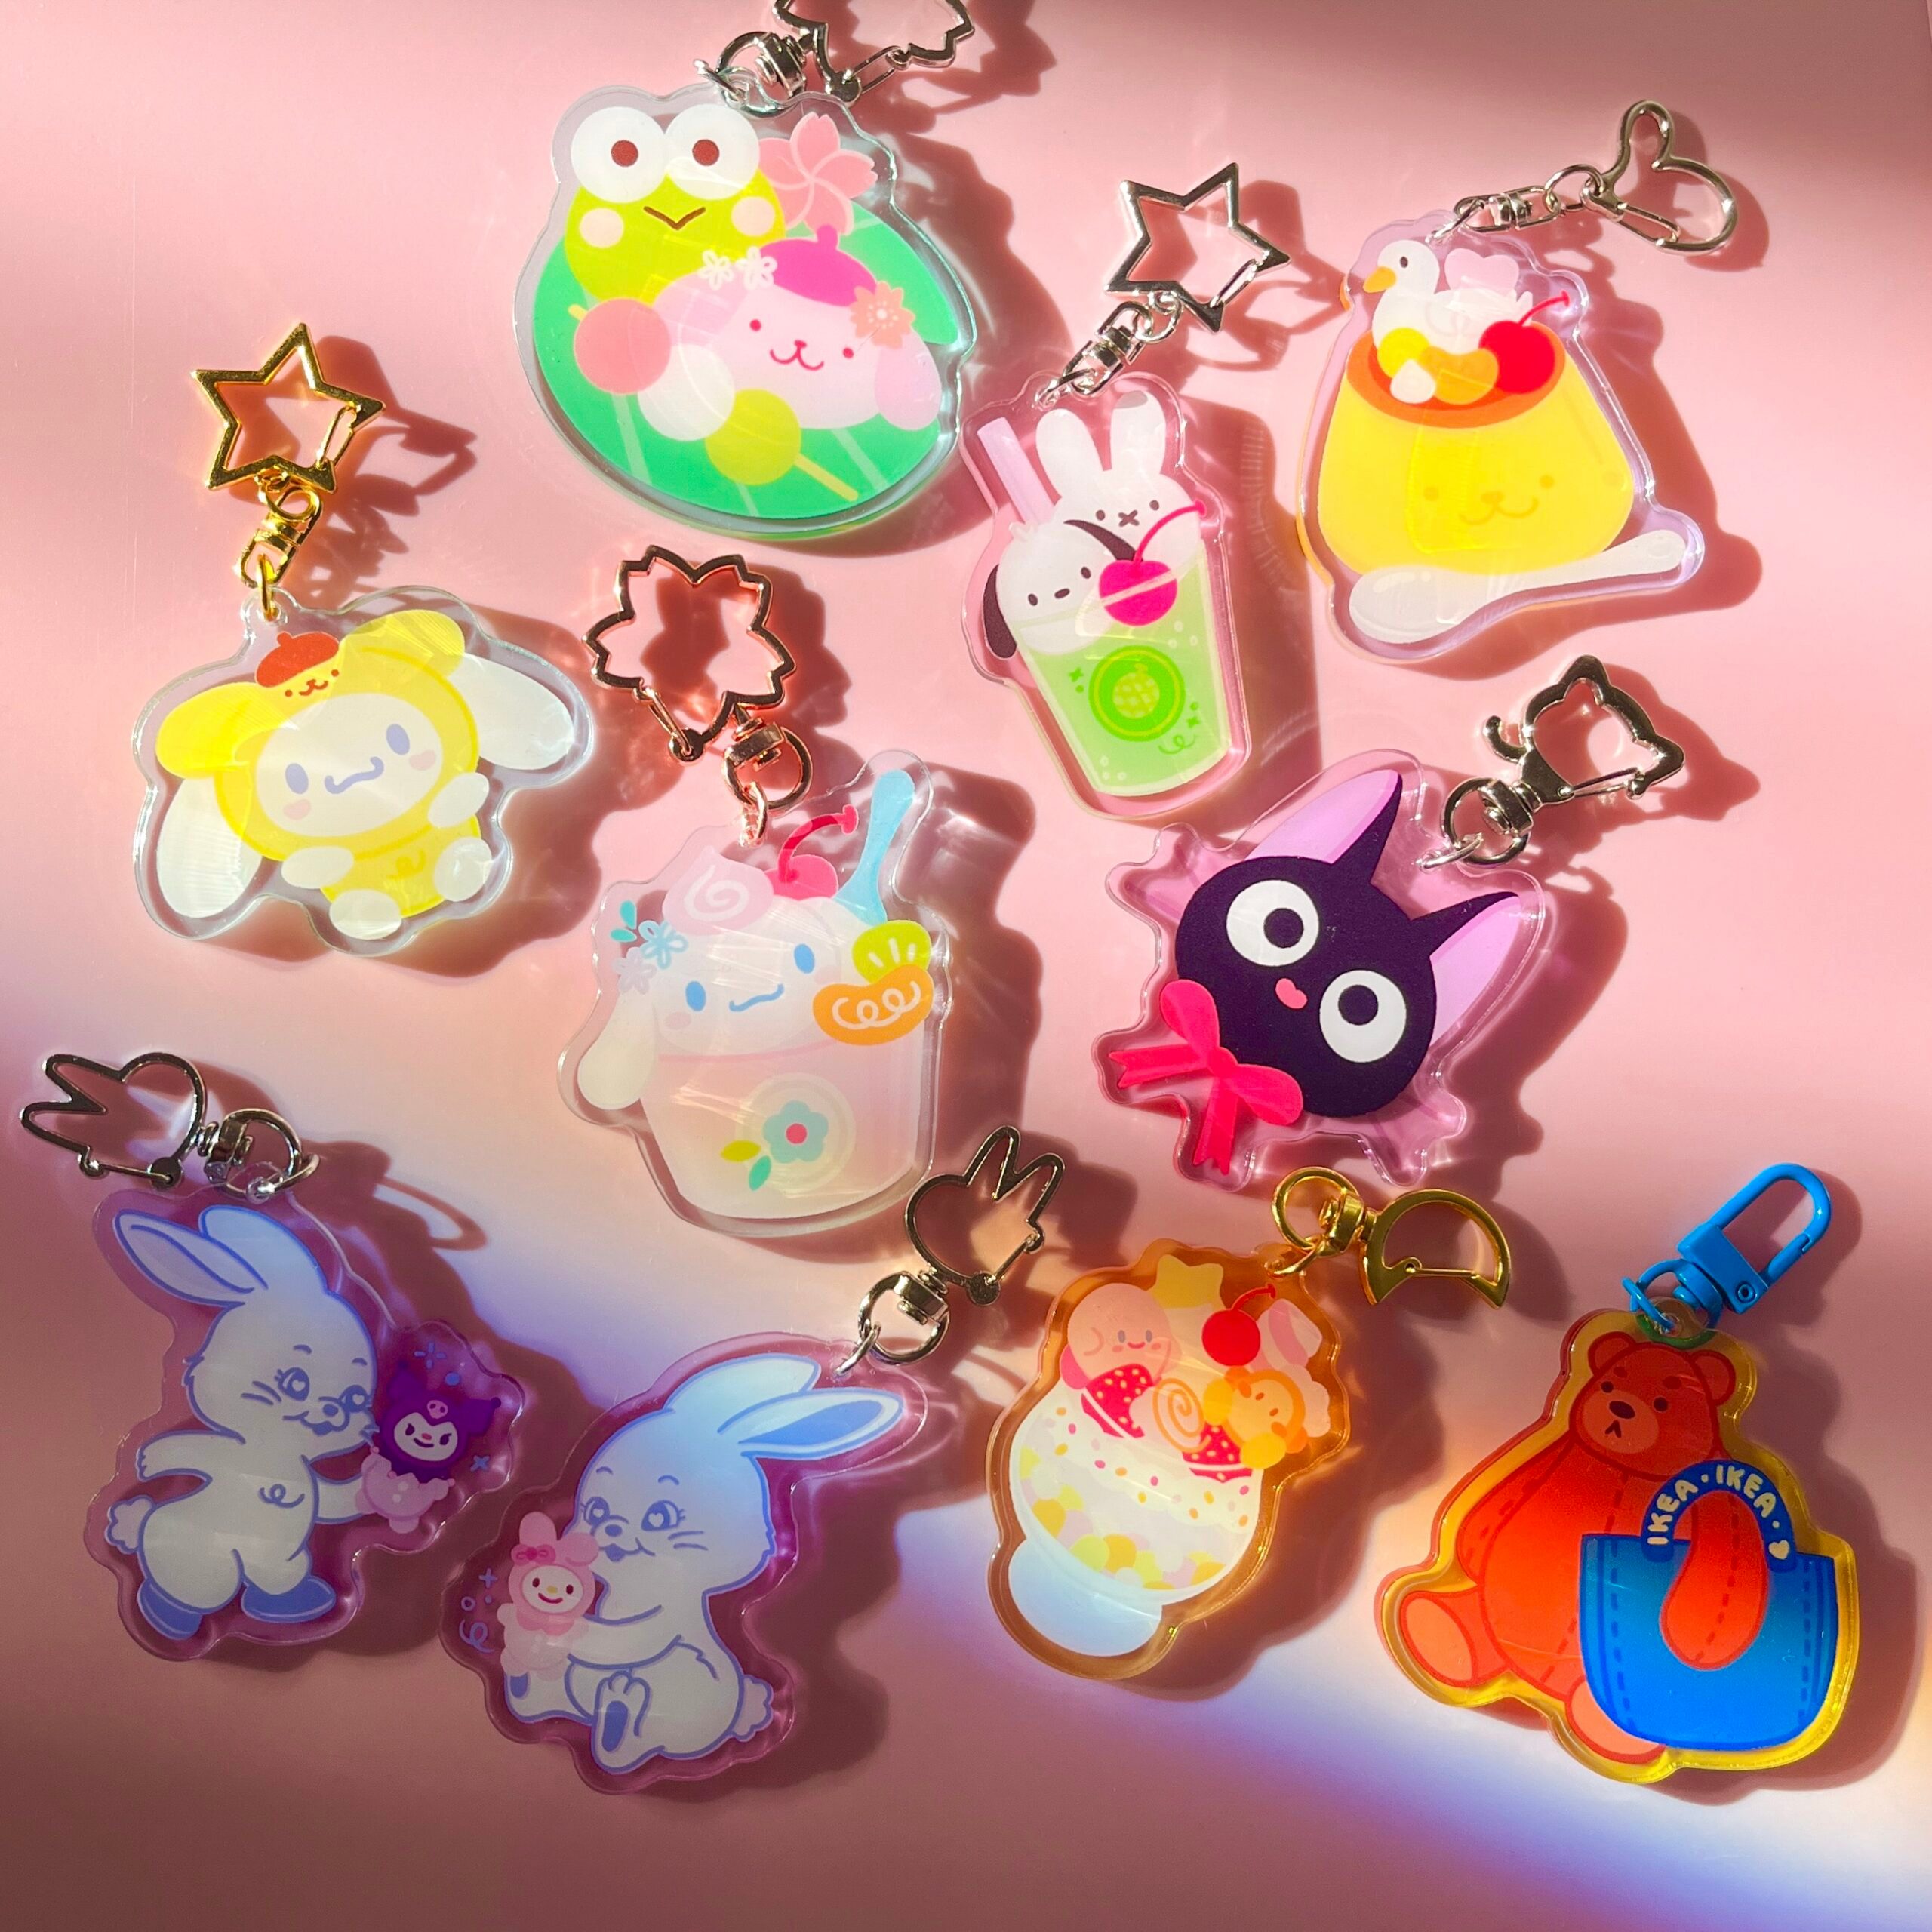 Sanrio Character Keychain Charms: Adorable Companions for Whimsical Style!